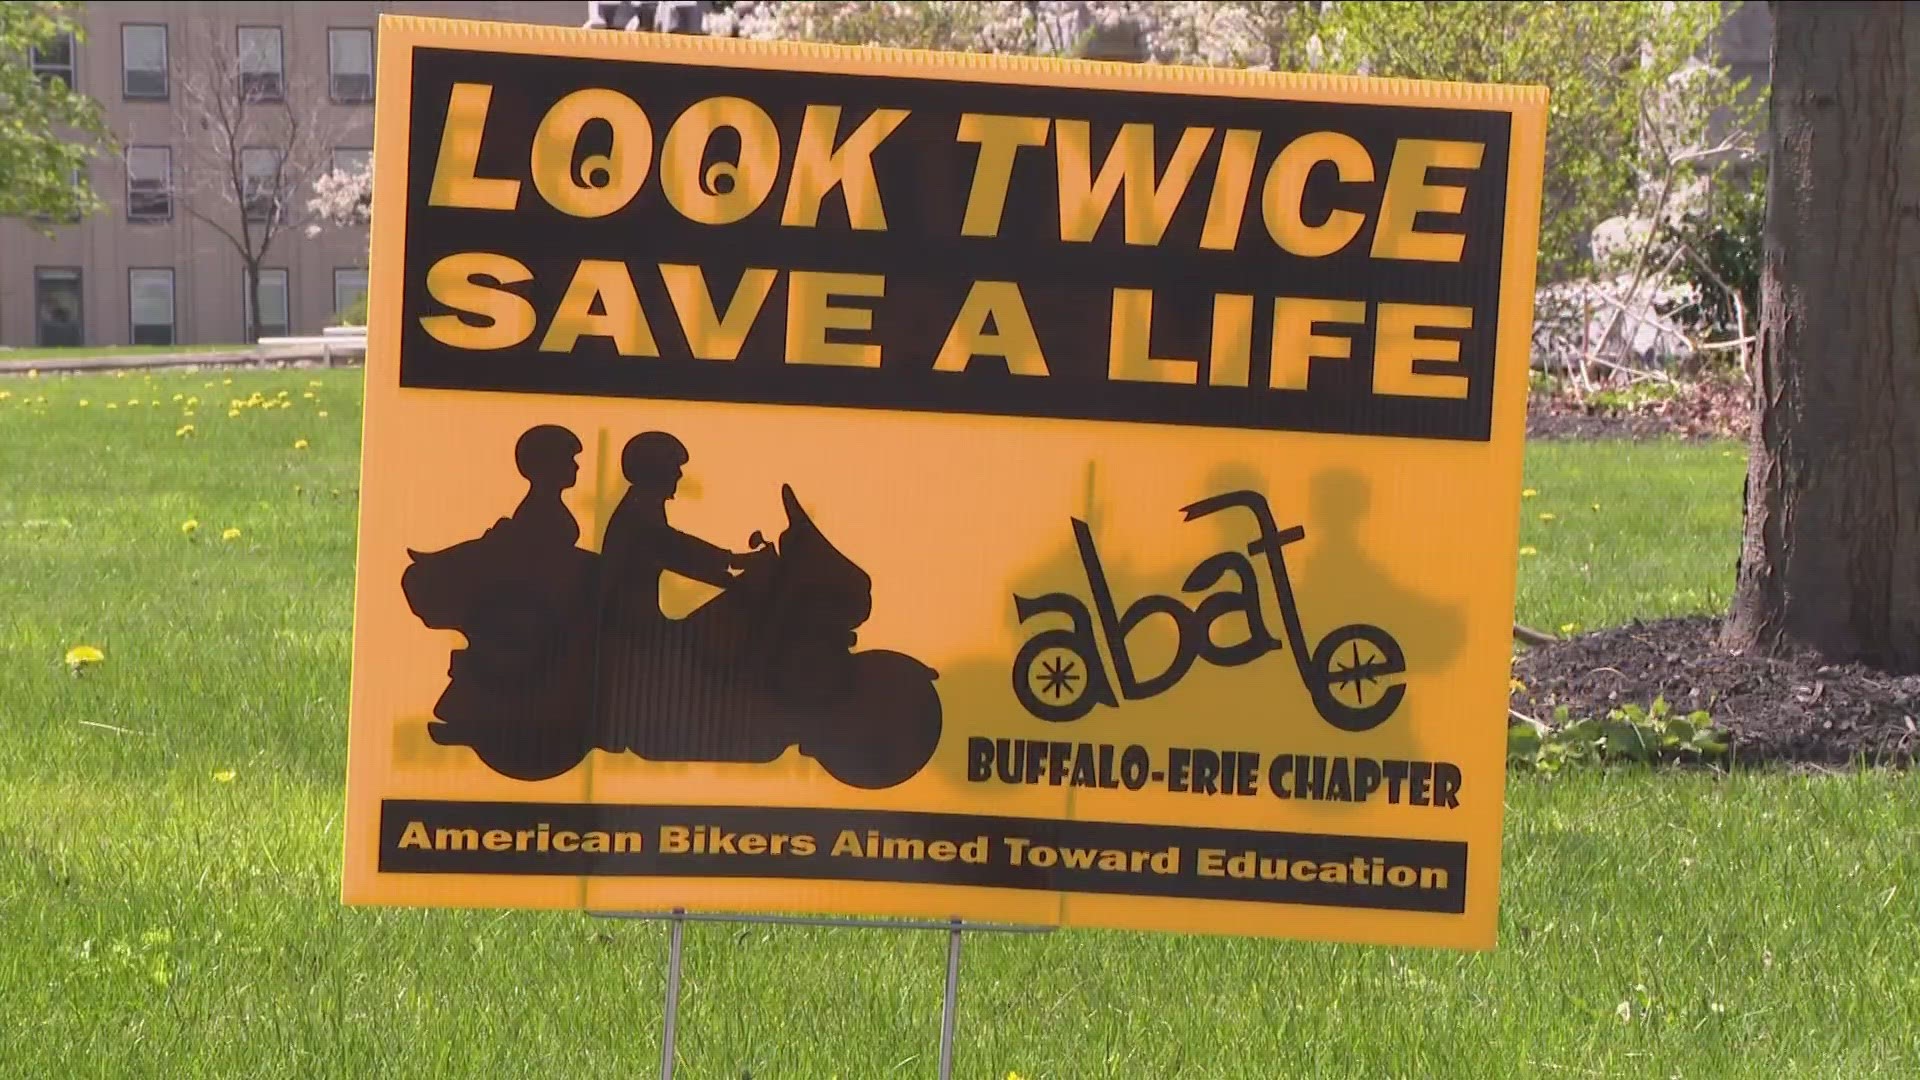 The message Saturday was look twice and save a life.